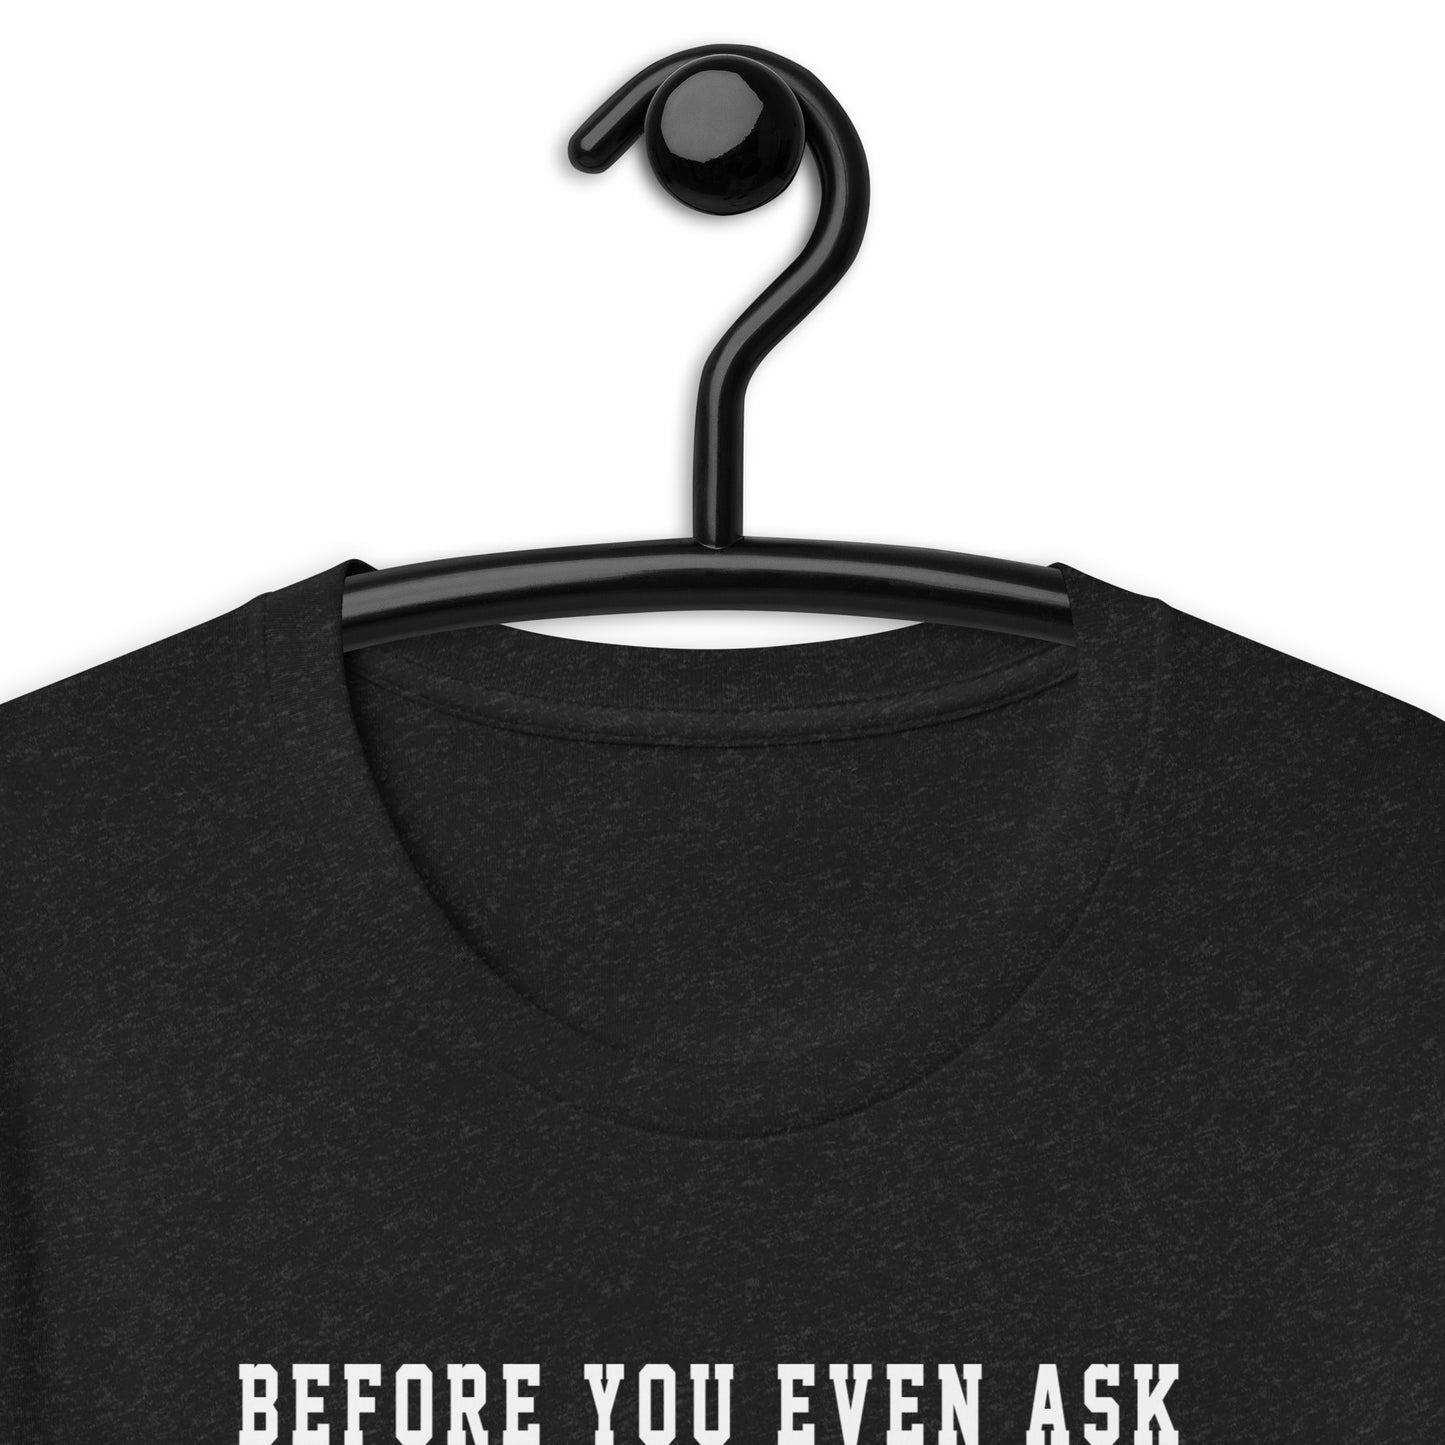 Before you ask Fans Short-Sleeve Unisex T-Shirt